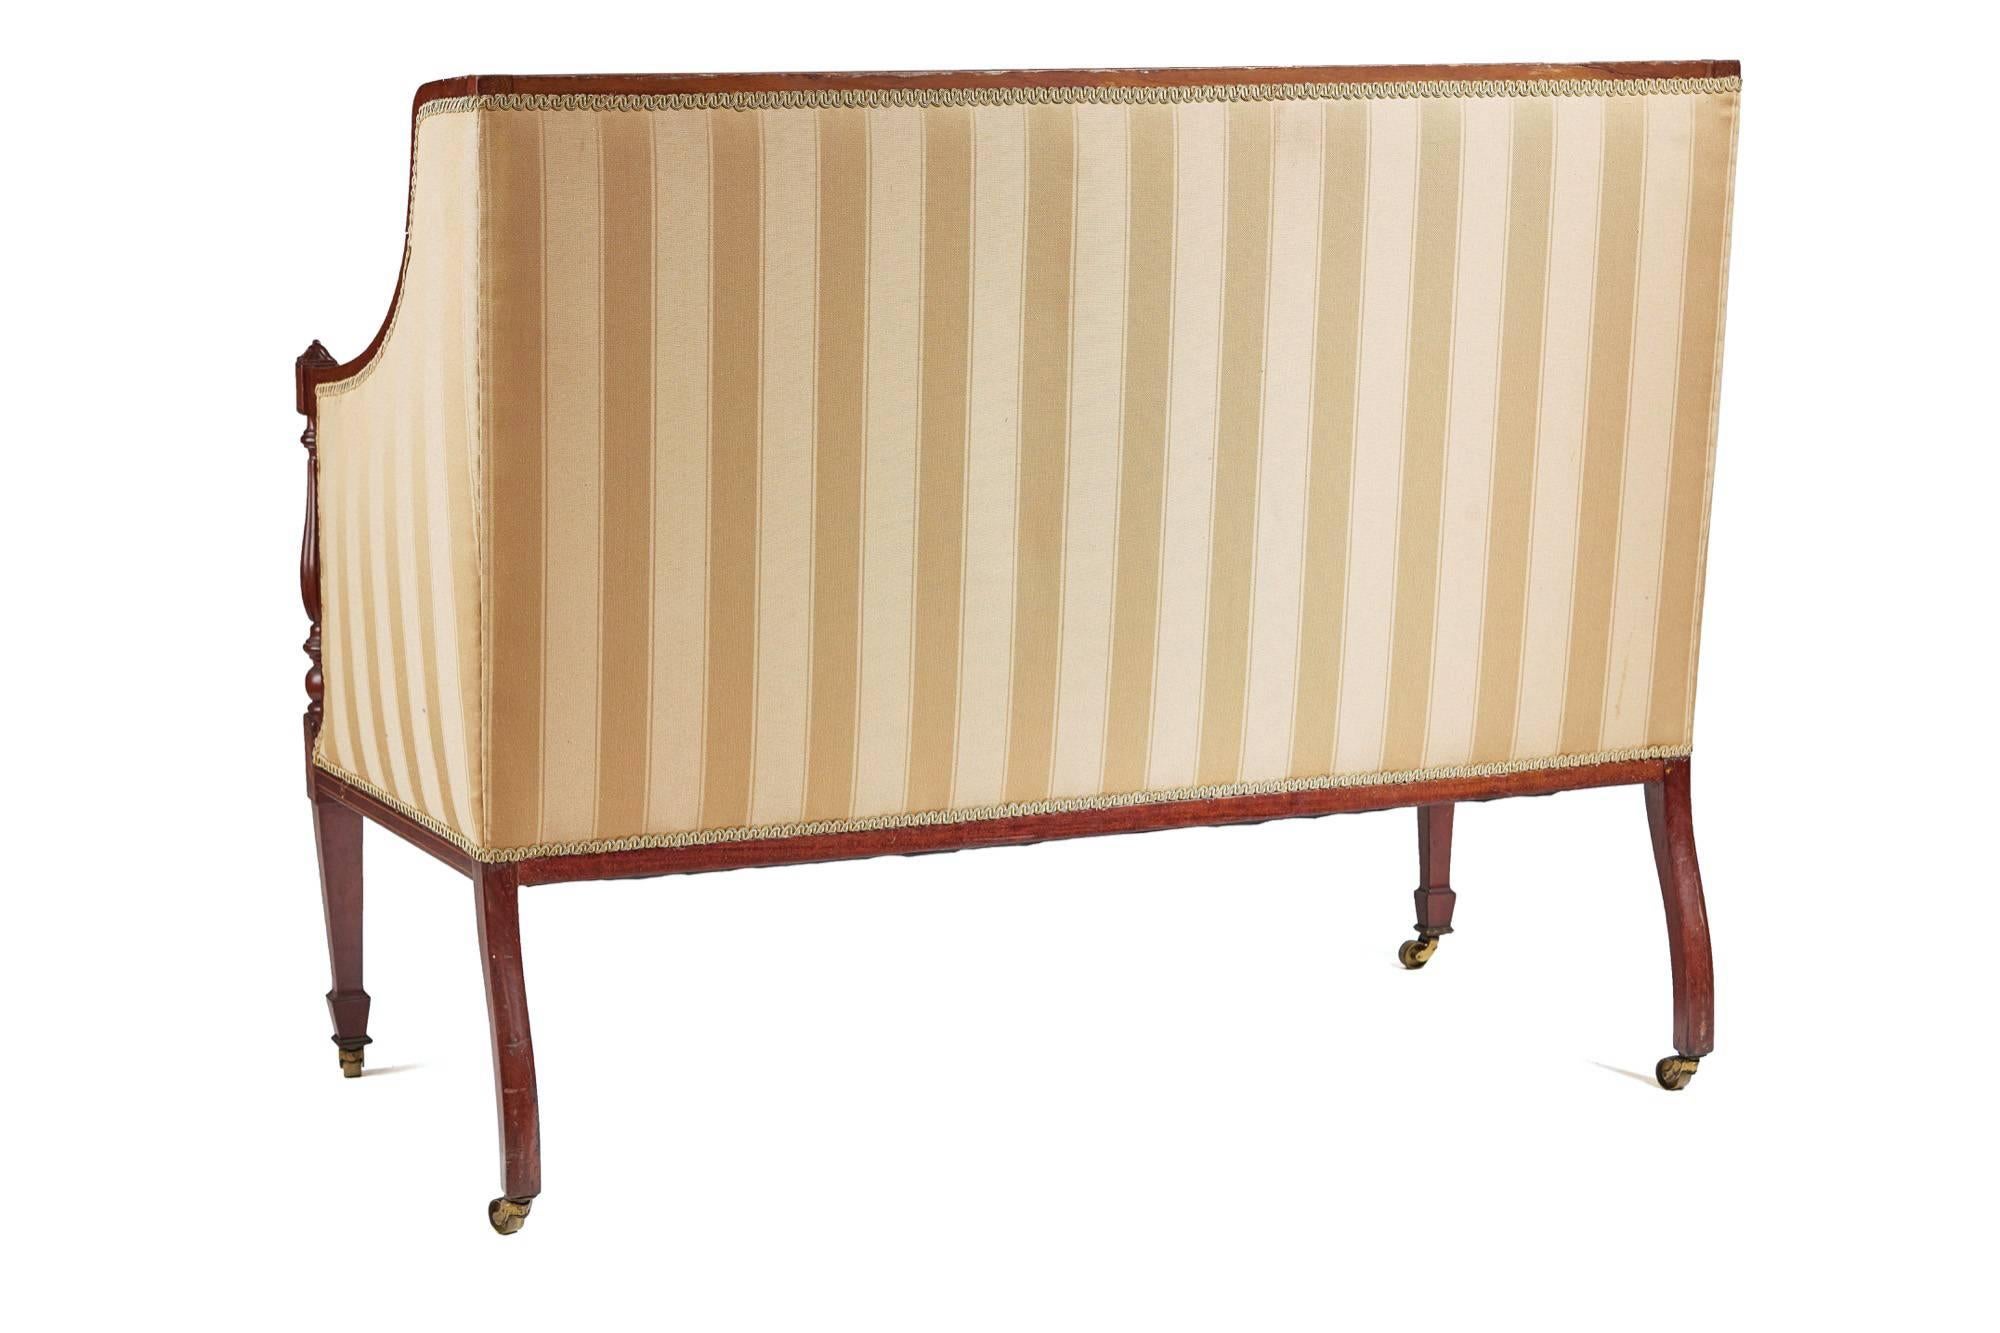 A Fine quality inlaid mahogany settee,with a shaped back framed in inlaid mahogany comes forward to form the arms,shaped reeded turned supports with carved finals, cushion seat,inlaid tapering front leg with shaped back legs,with original brass